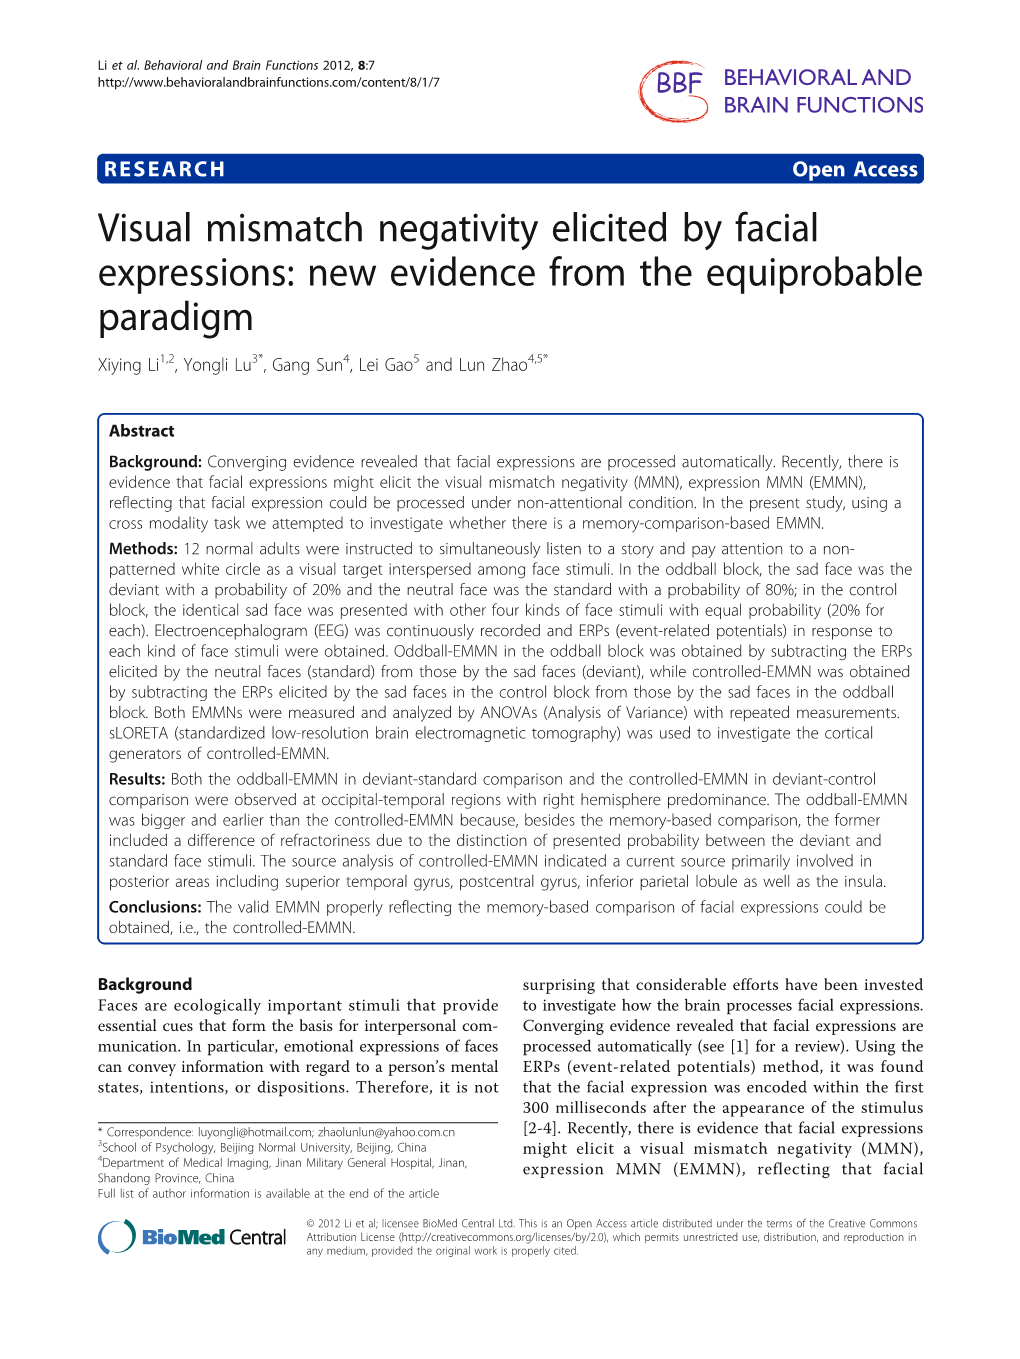 Visual Mismatch Negativity Elicited by Facial Expressions: New Evidence from the Equiprobable Paradigm Xiying Li1,2, Yongli Lu3*, Gang Sun4, Lei Gao5 and Lun Zhao4,5*